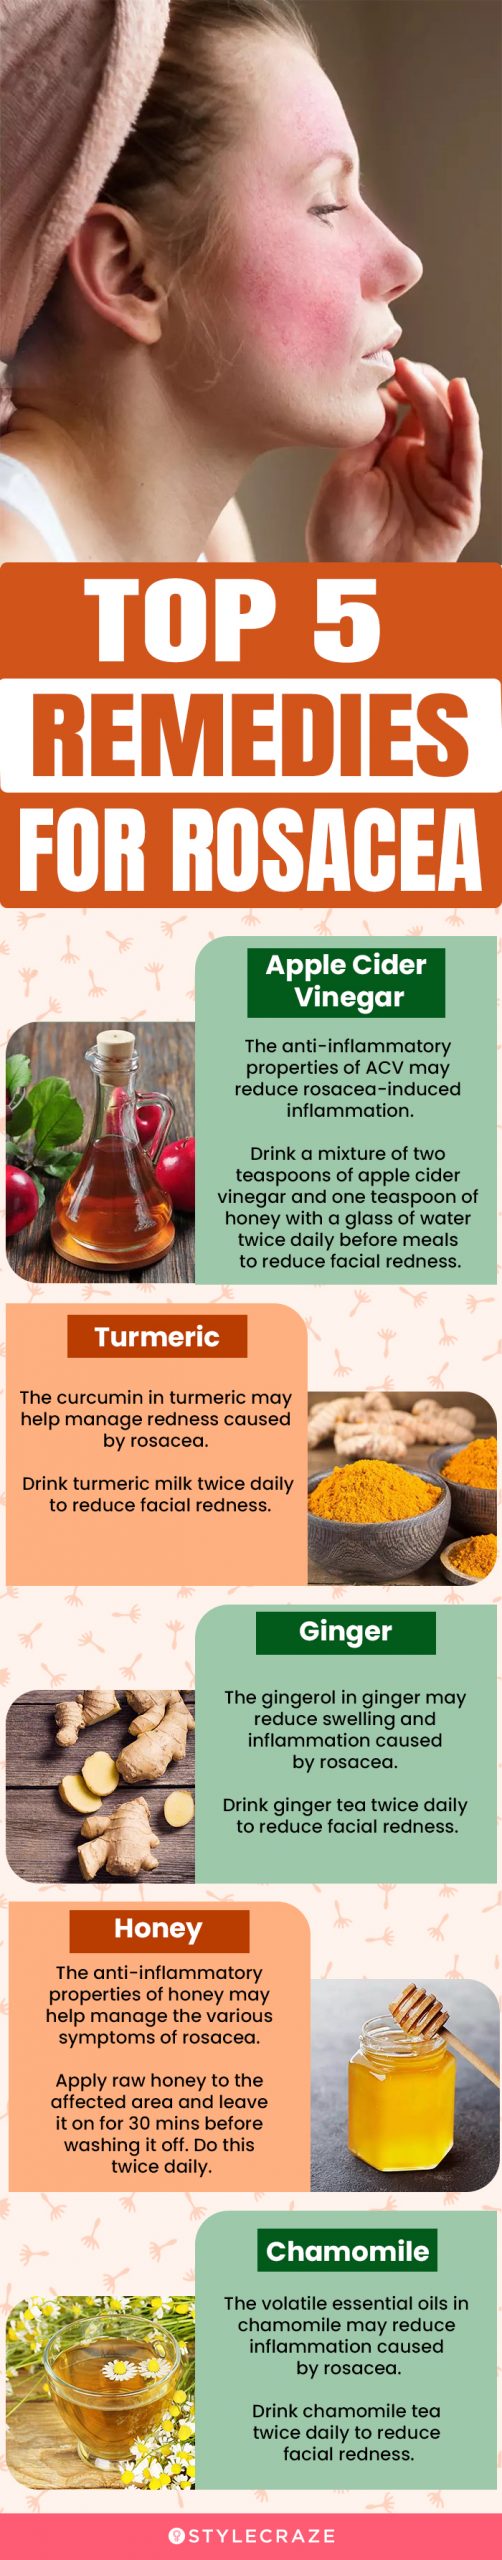 top 5 remedies for rosacea (infographic)